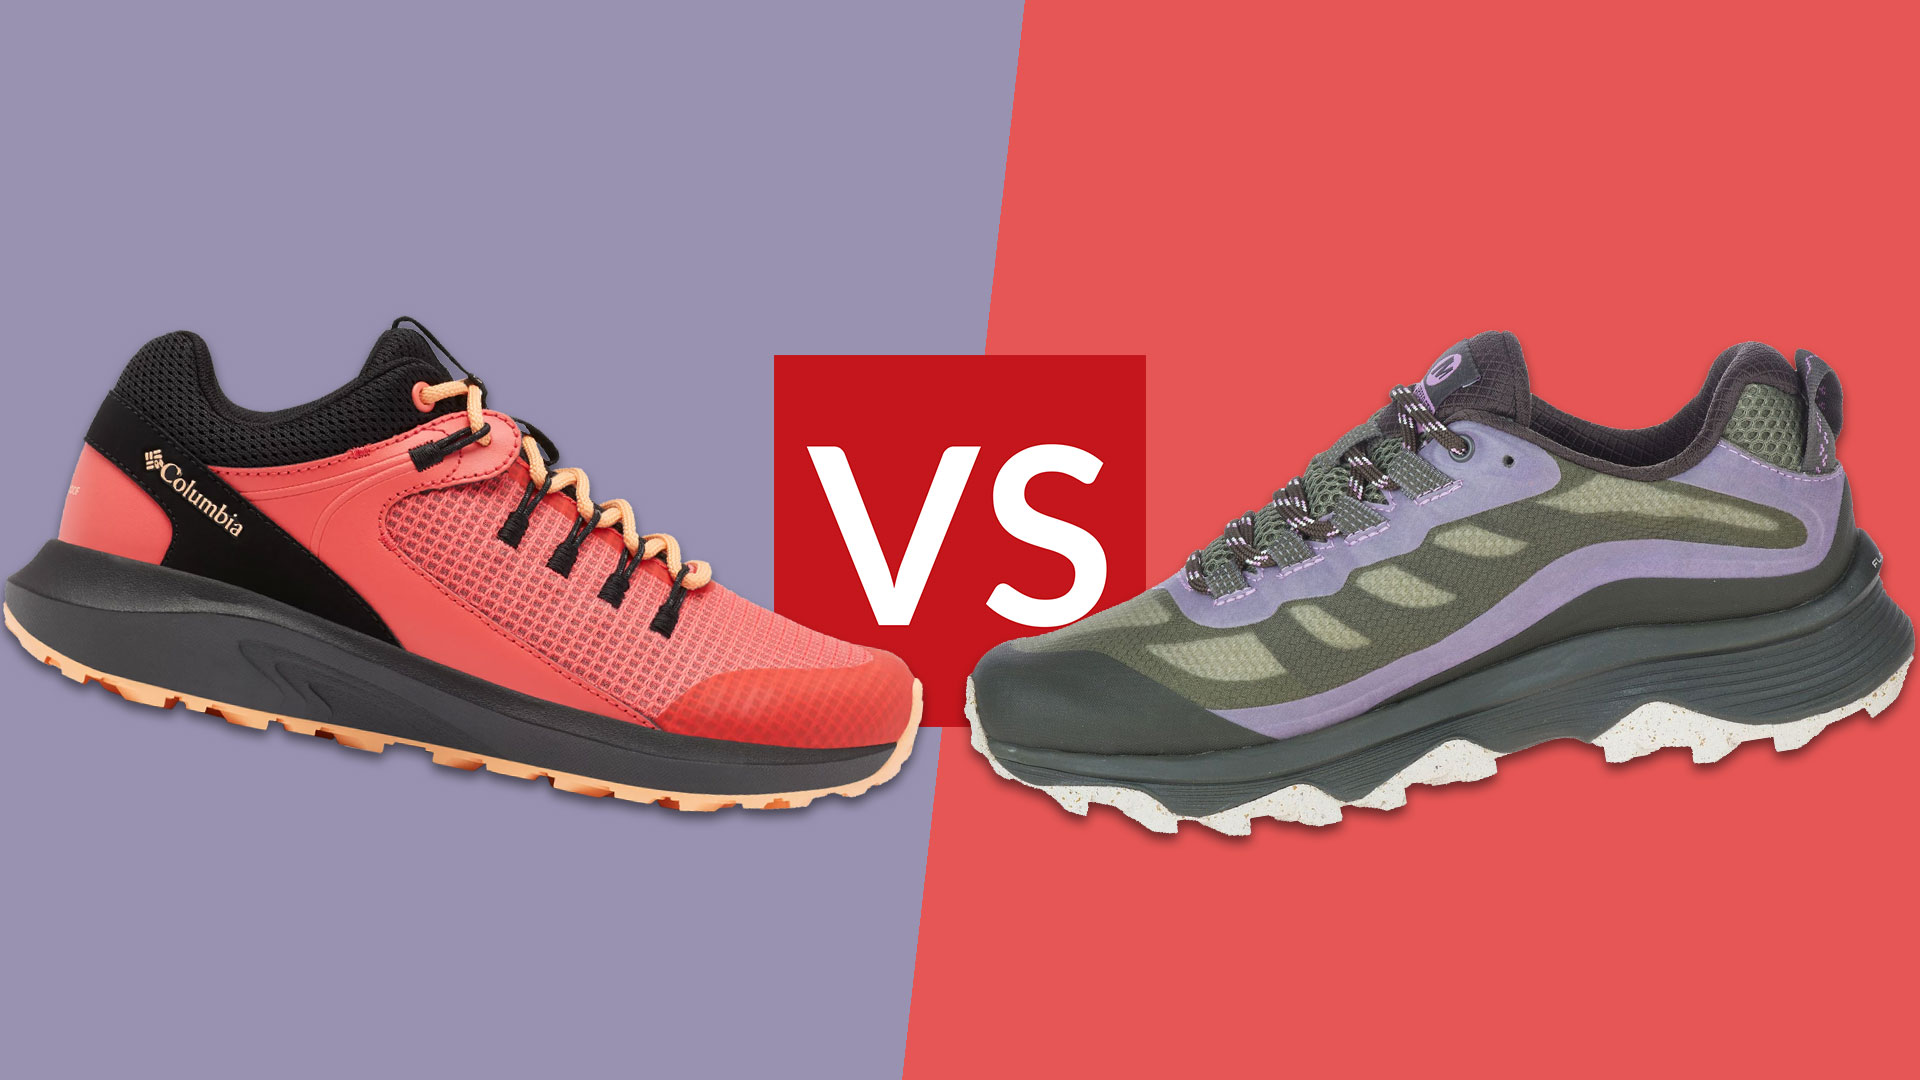 Merrell Moab Speed Gore-Tex vs Columbia Trailstorm: which